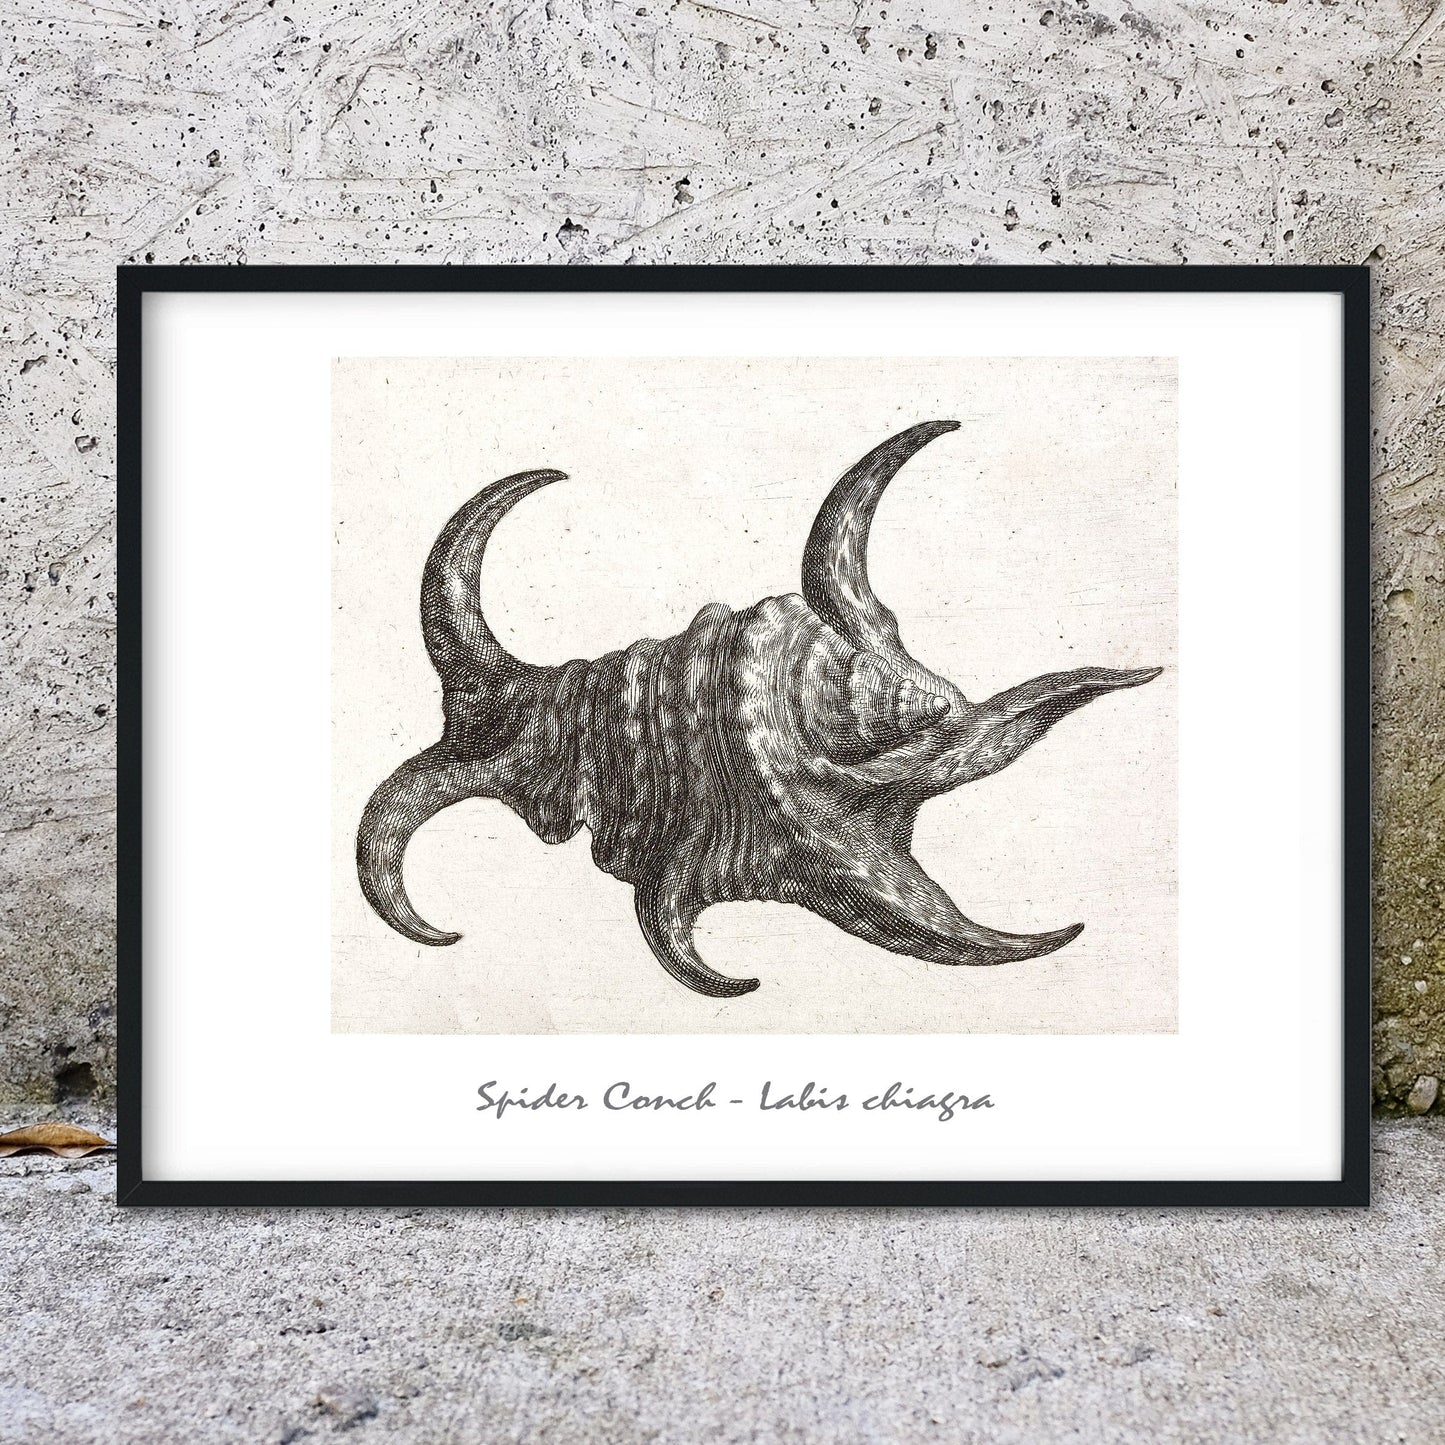 Spider Conch seashell antique drawing shell print shell prints